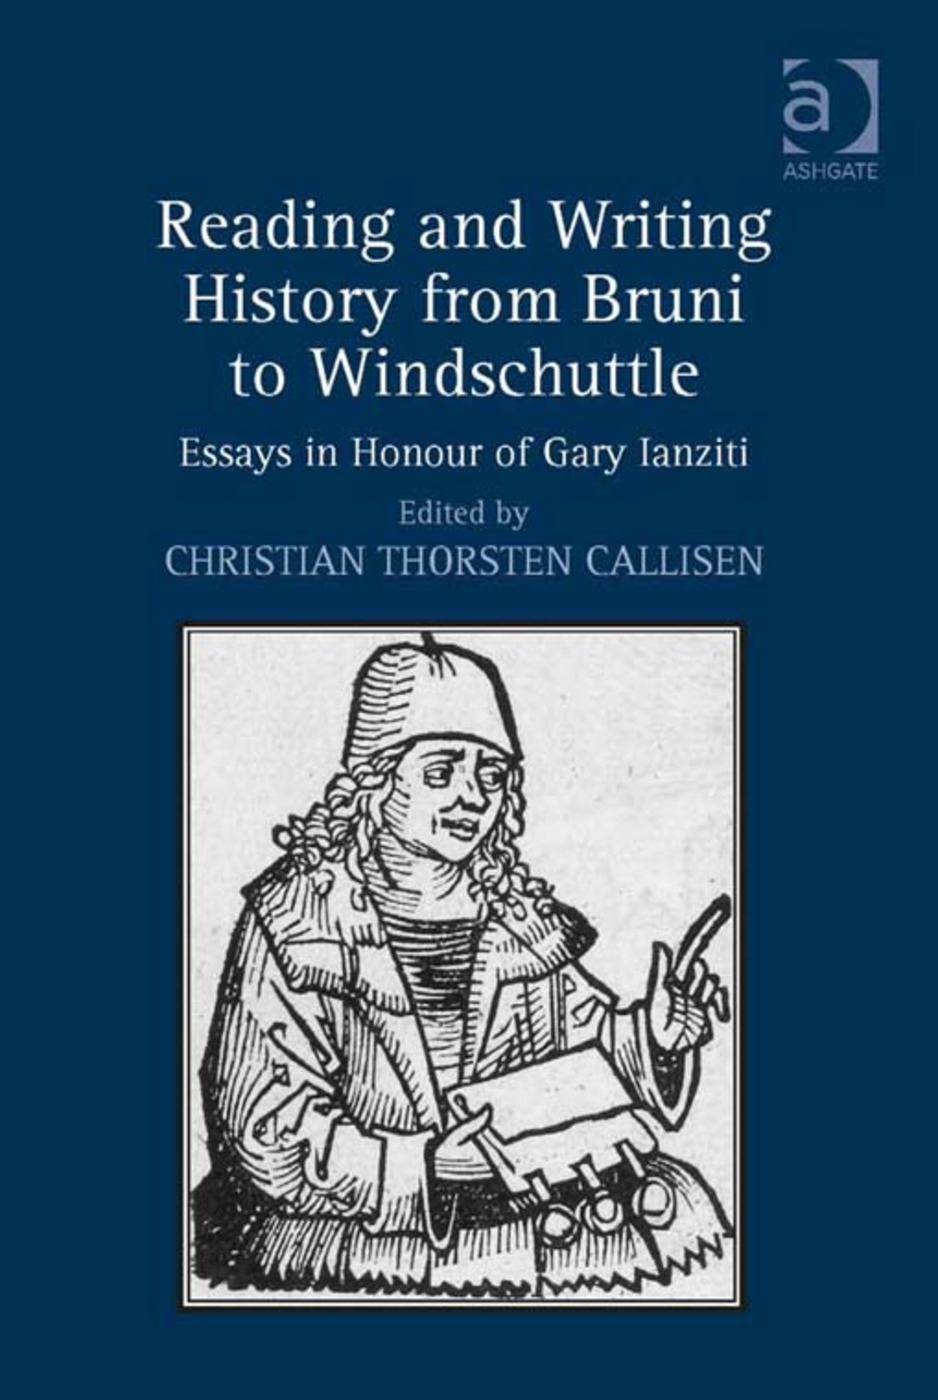 Reading and Writing History from Bruni to Windschuttle: Essays in Honour of Gary Ianziti. Edited by Christian Thorsten Callisen